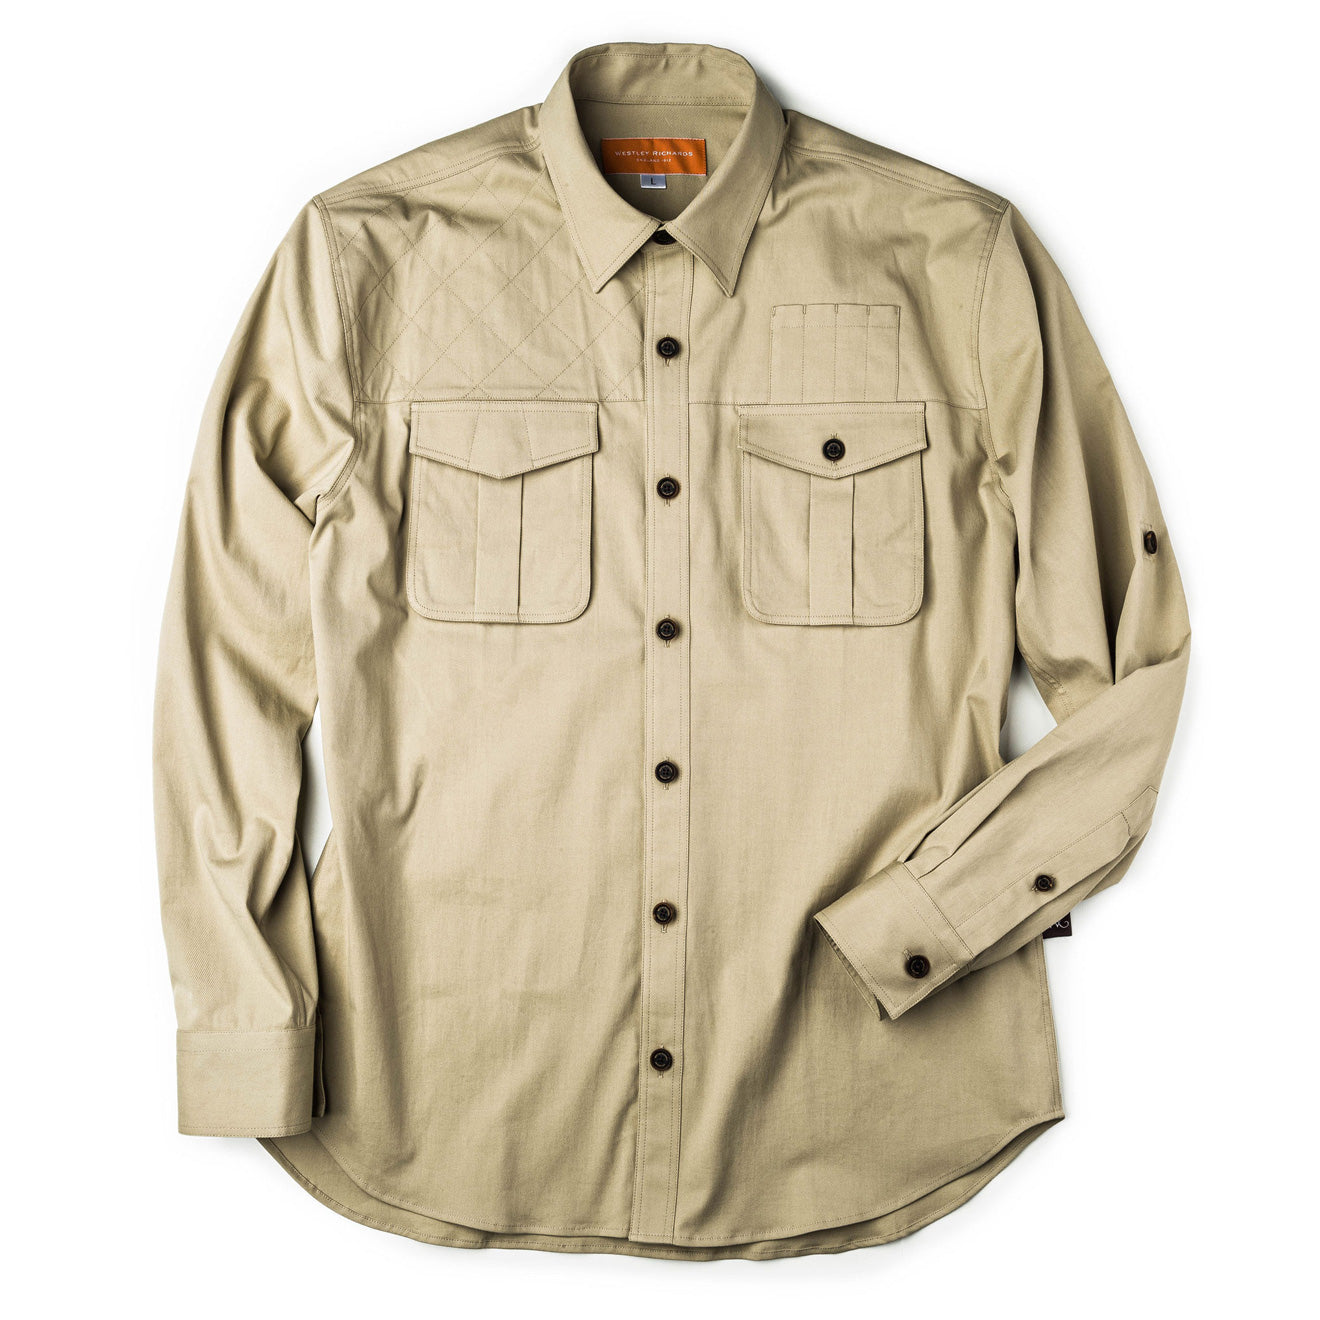 Westley Richards Campaign Shirt Light Stone | The Sporting Lodge